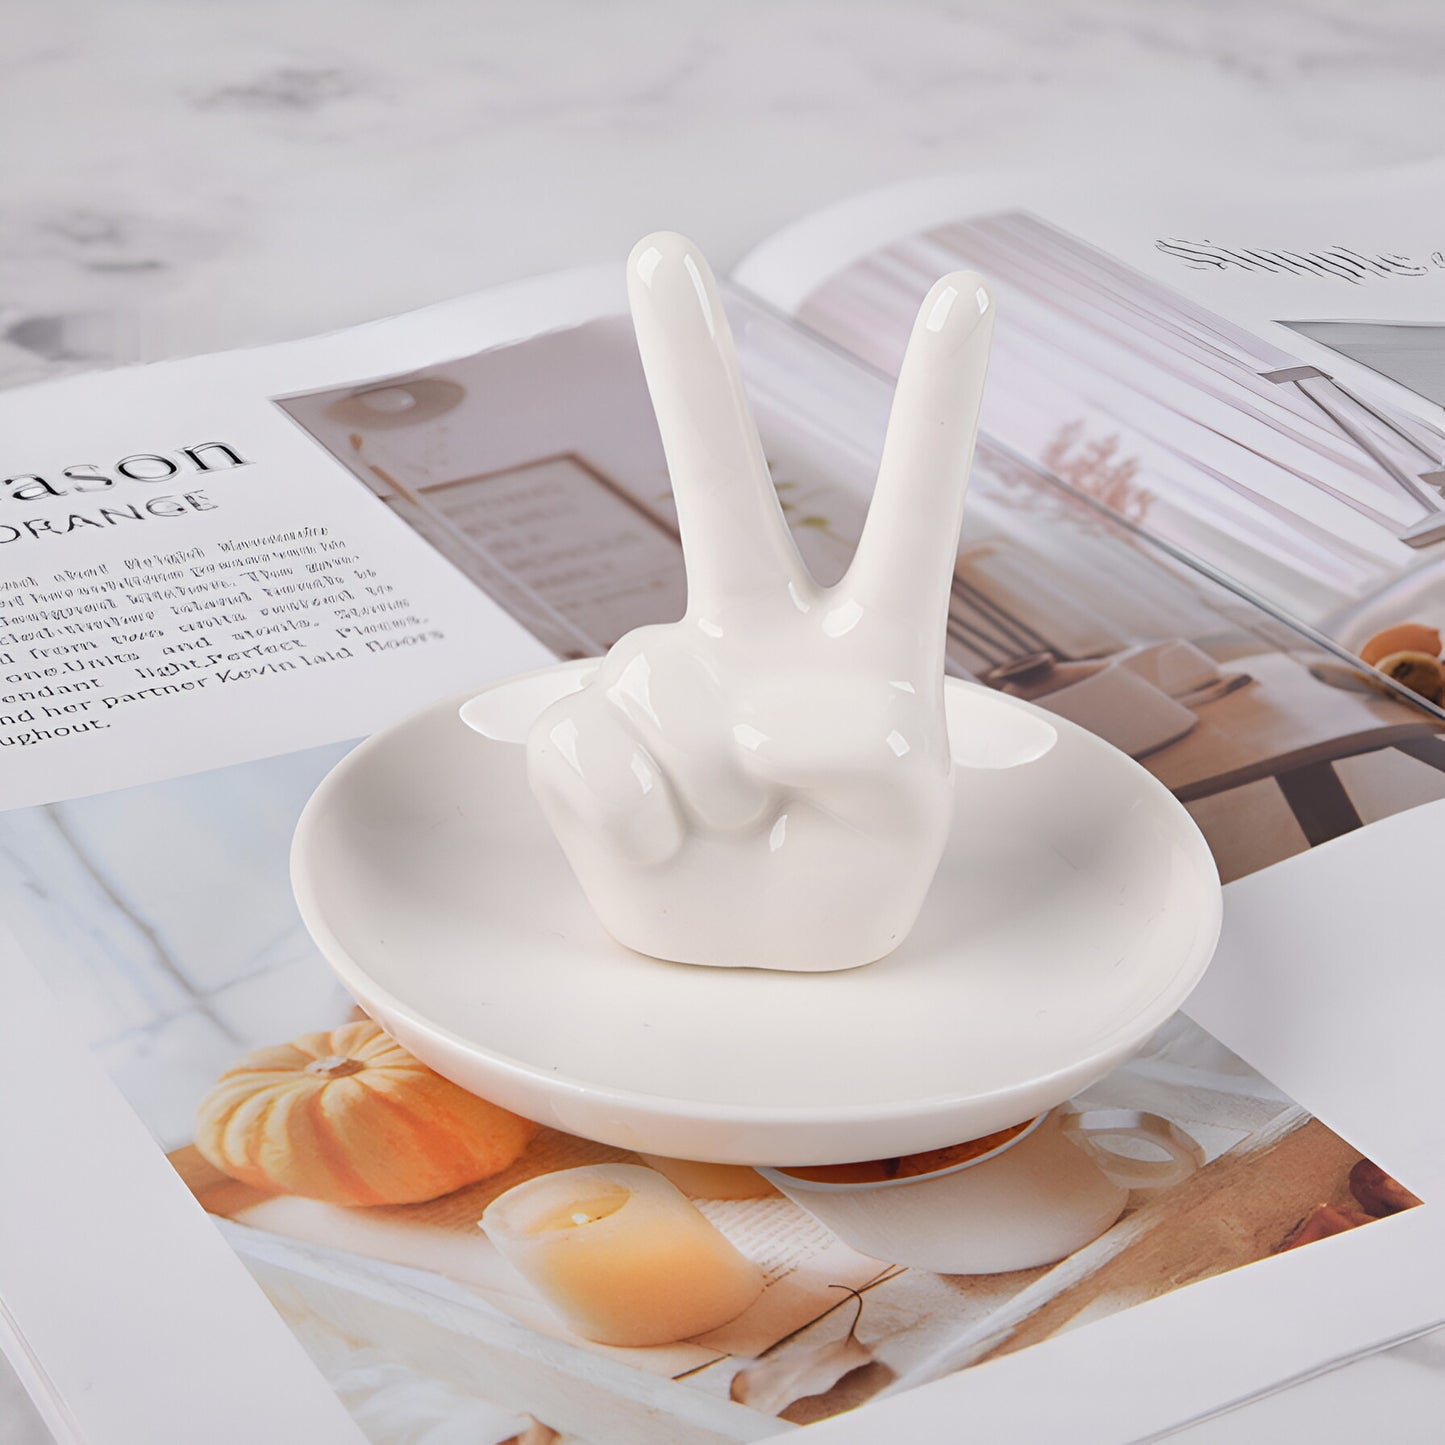 Nordic Style Ceramic Hand Gesture Ring Holder, 3.94 x 3.93 x 3.15 Inches, Creative Vanity Storage Tray for Hand Display, Bedroom Vanity Decor, Ideal Gift for Women, Birthdays, Valentine's Day, Mother's Day